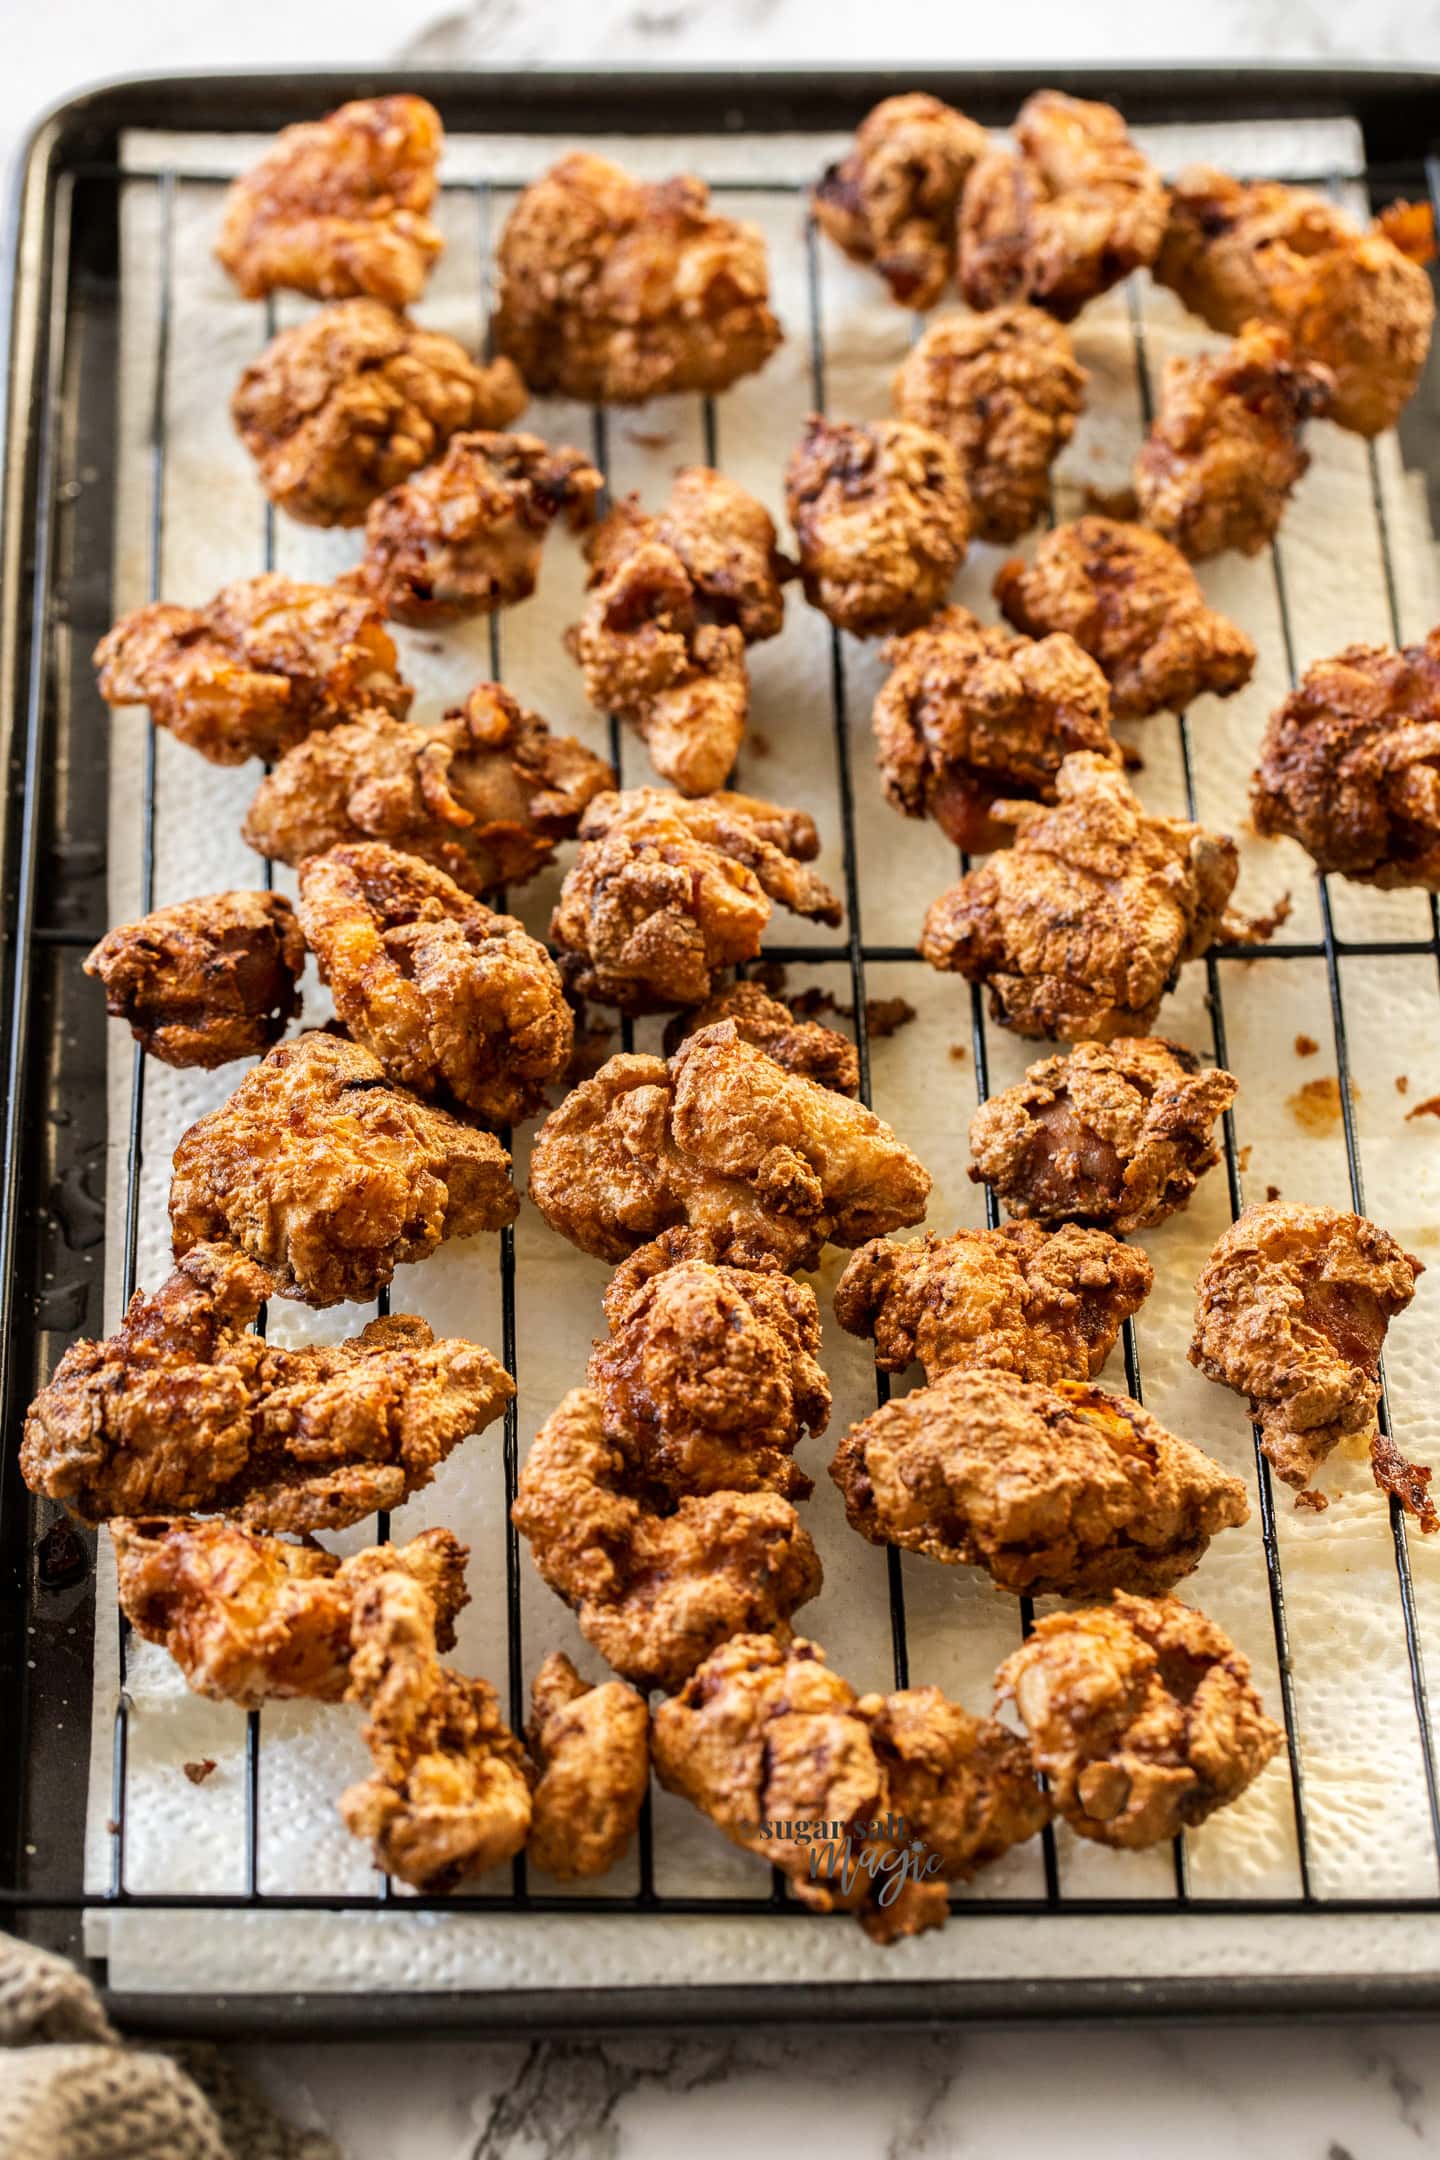 Small pieces of fried chicken on a rack over some paper towel.